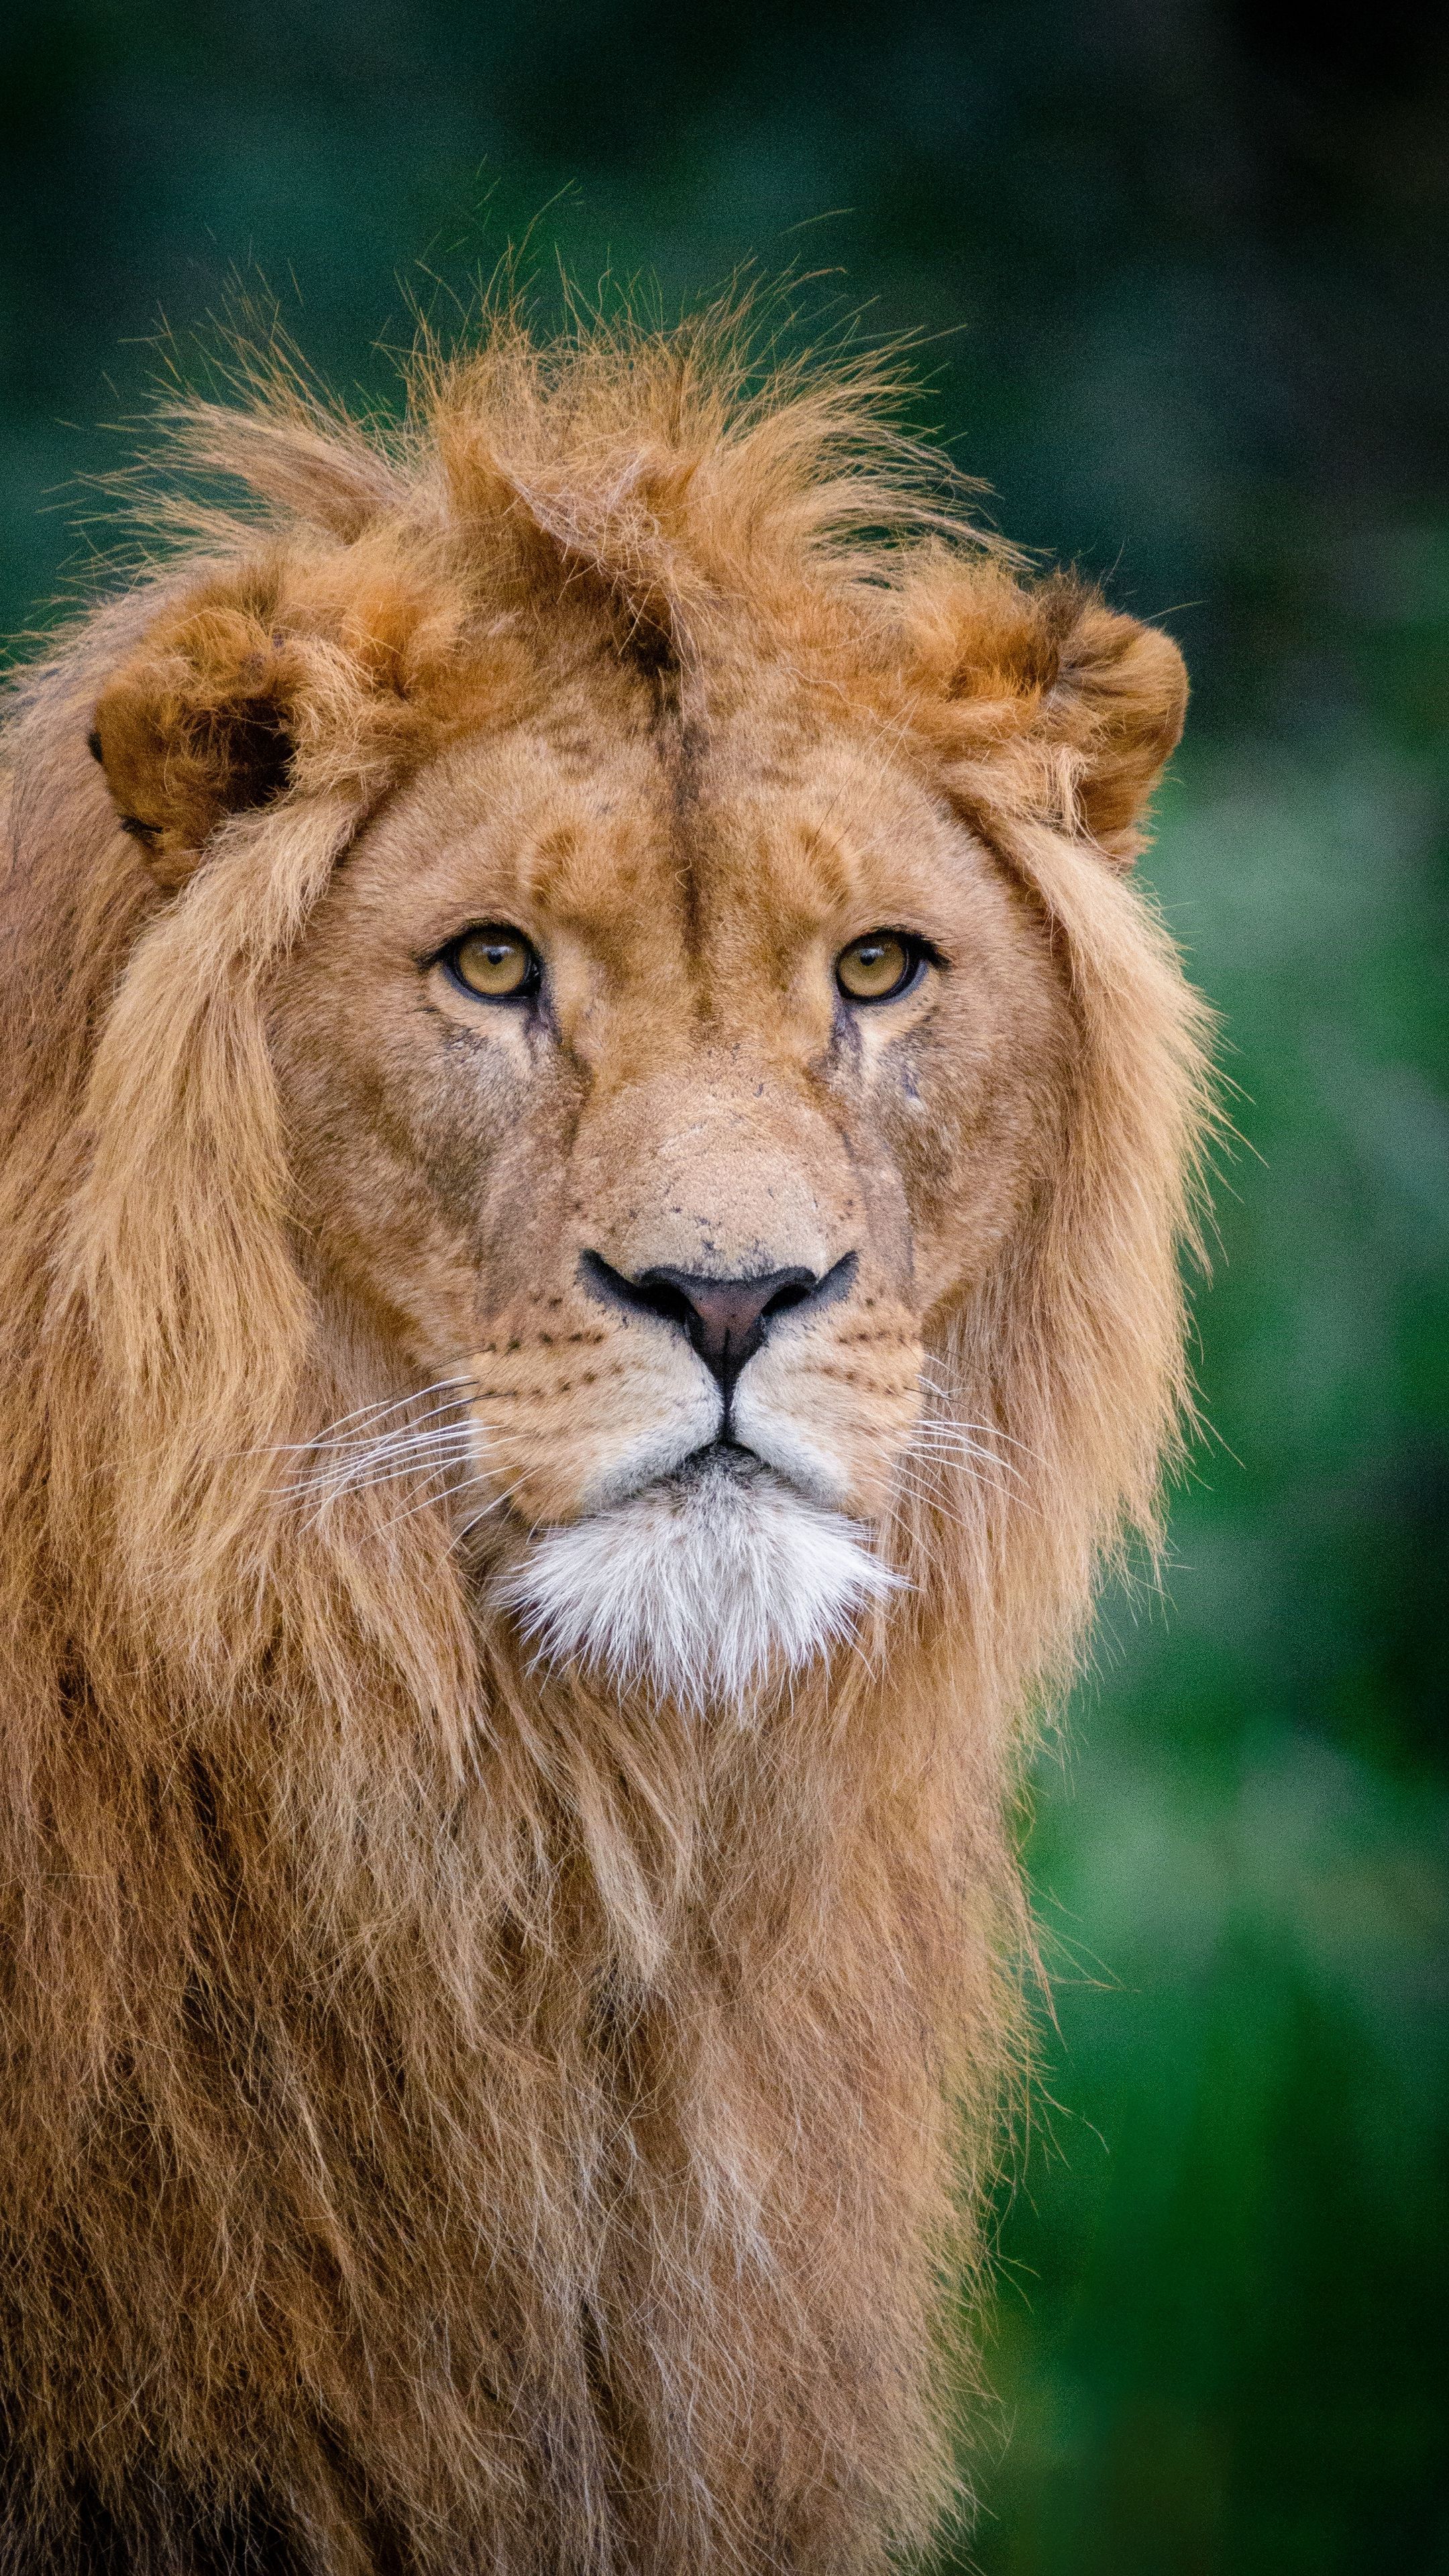 Animals #lion #kingofbeasts #muzzle #wallpaper HD 4k background for android :). Animals, African lion, Large cats wildlife